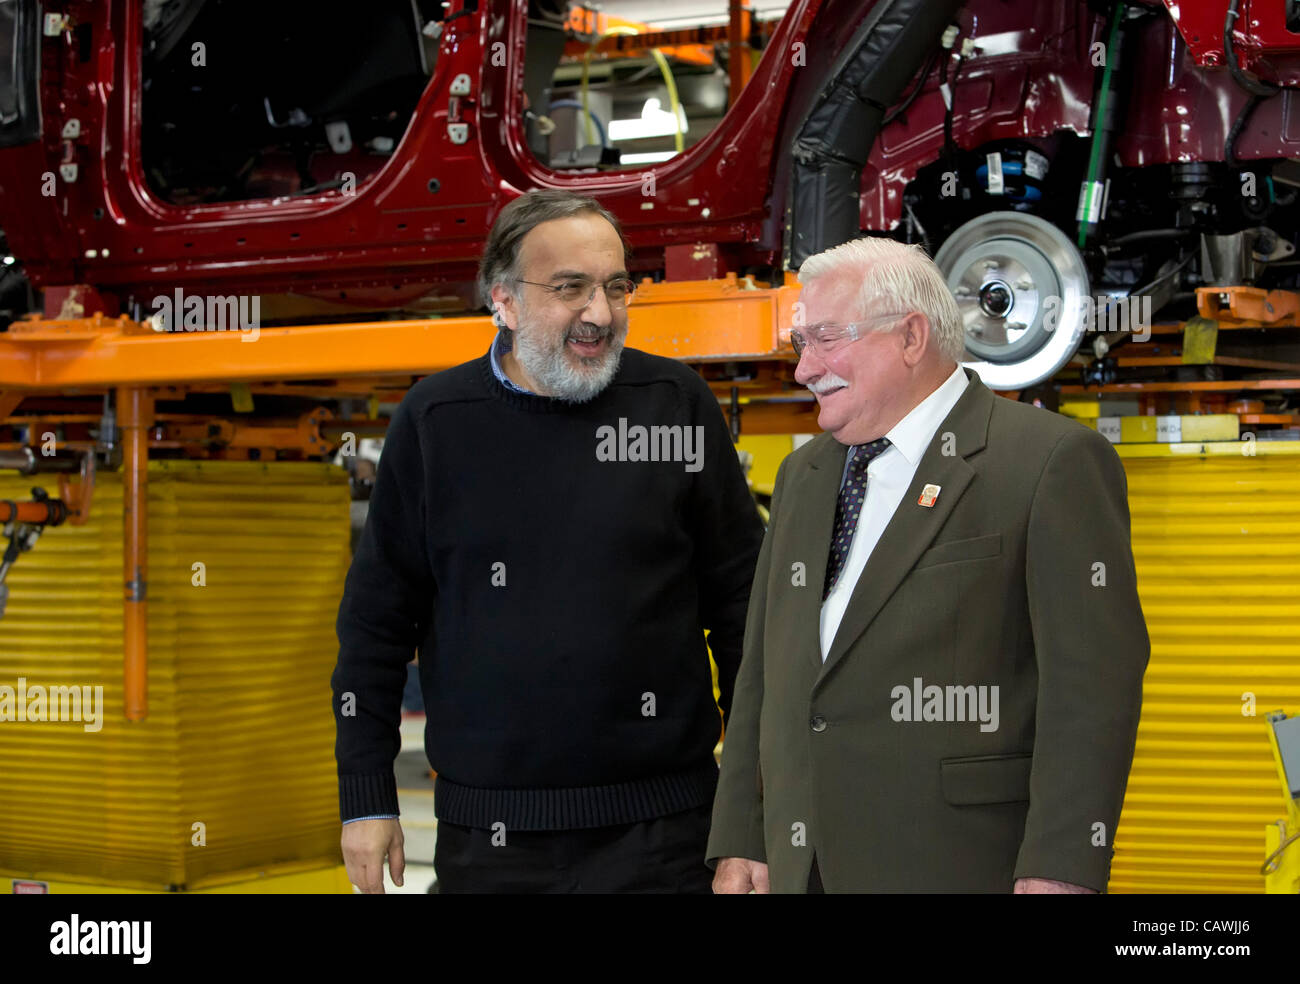 Detroit, Michigan - Lech Walesa (right) visits Chrysler's Jefferson North Assembly Plant with Chrysler CEO Sergio Marchionne. Walesa was a founder of the Solidarity union movement in Poland in 1980 and was elected president of Poland in 1990. Stock Photo